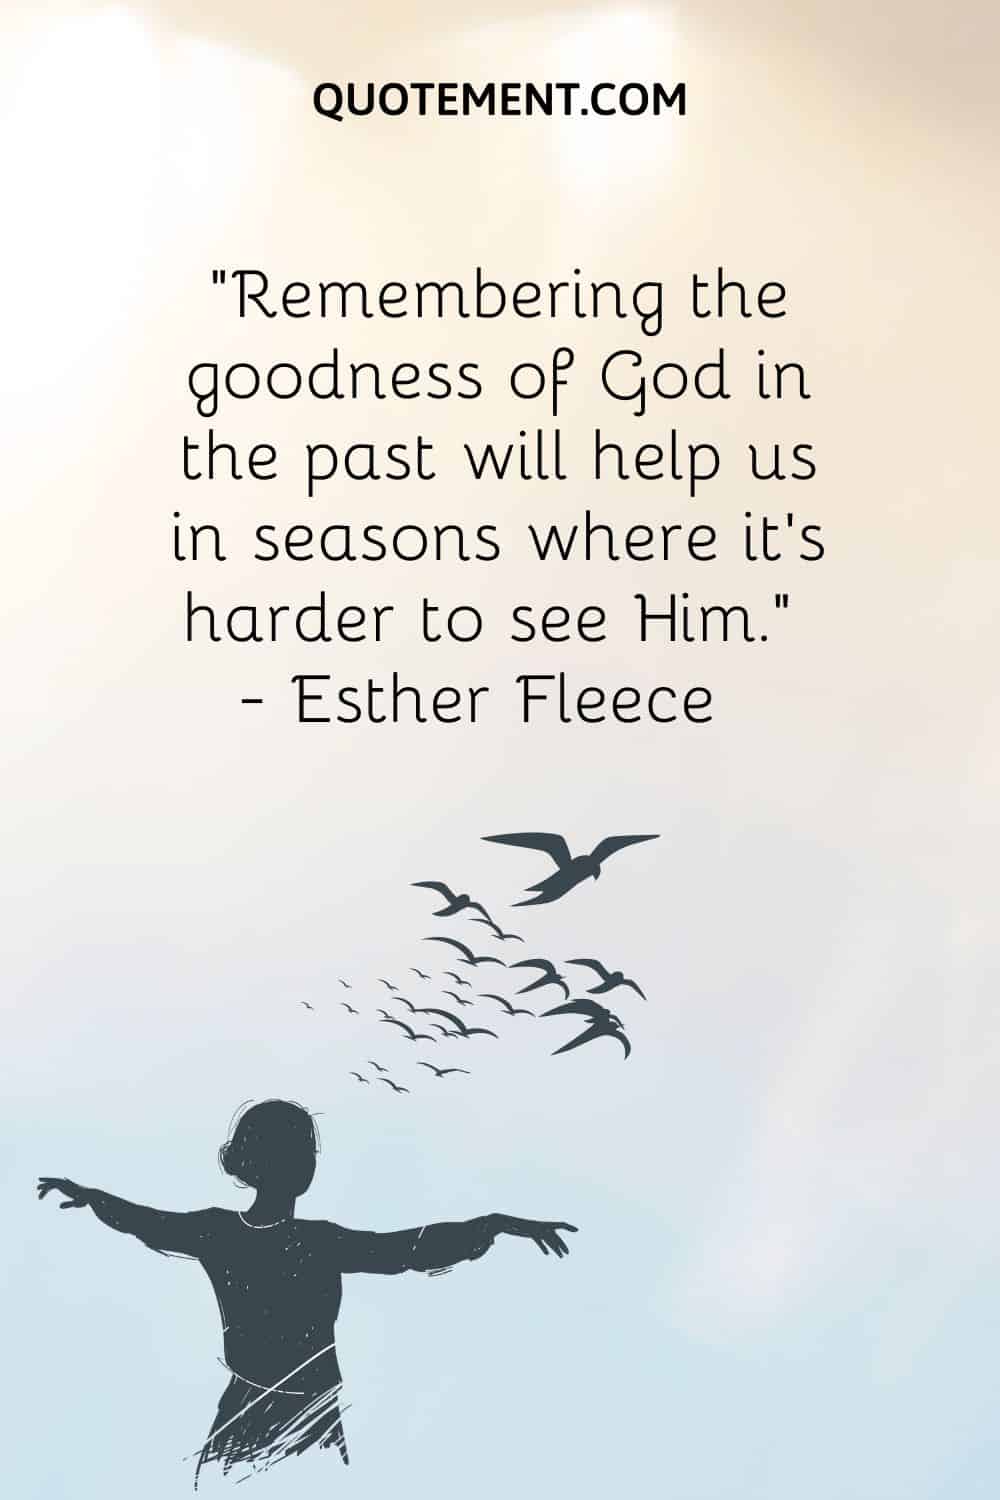 “Remembering the goodness of God in the past will help us in seasons where it’s harder to see Him.” ― Esther Fleece